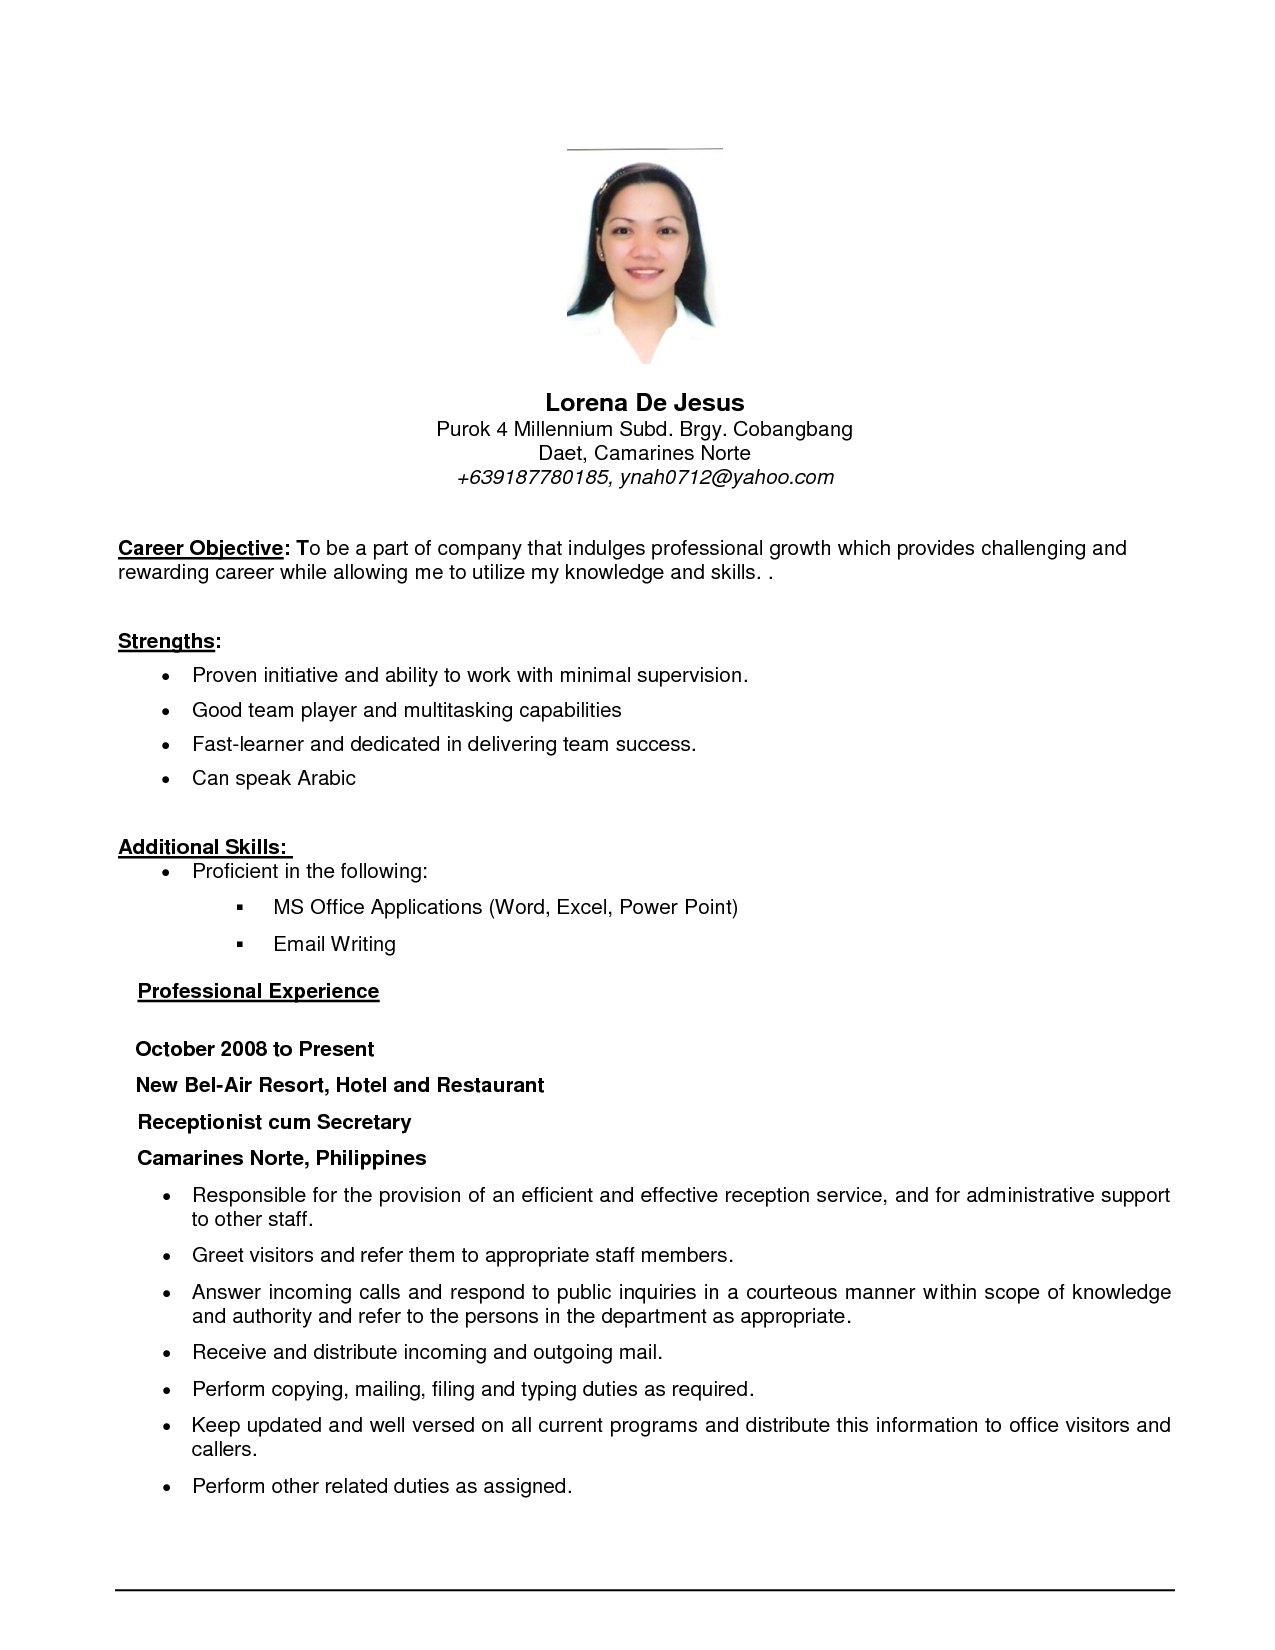 Resume Objective Examples  Job Resume Objective Examples Drupaldance E280a2 Aceeducation With